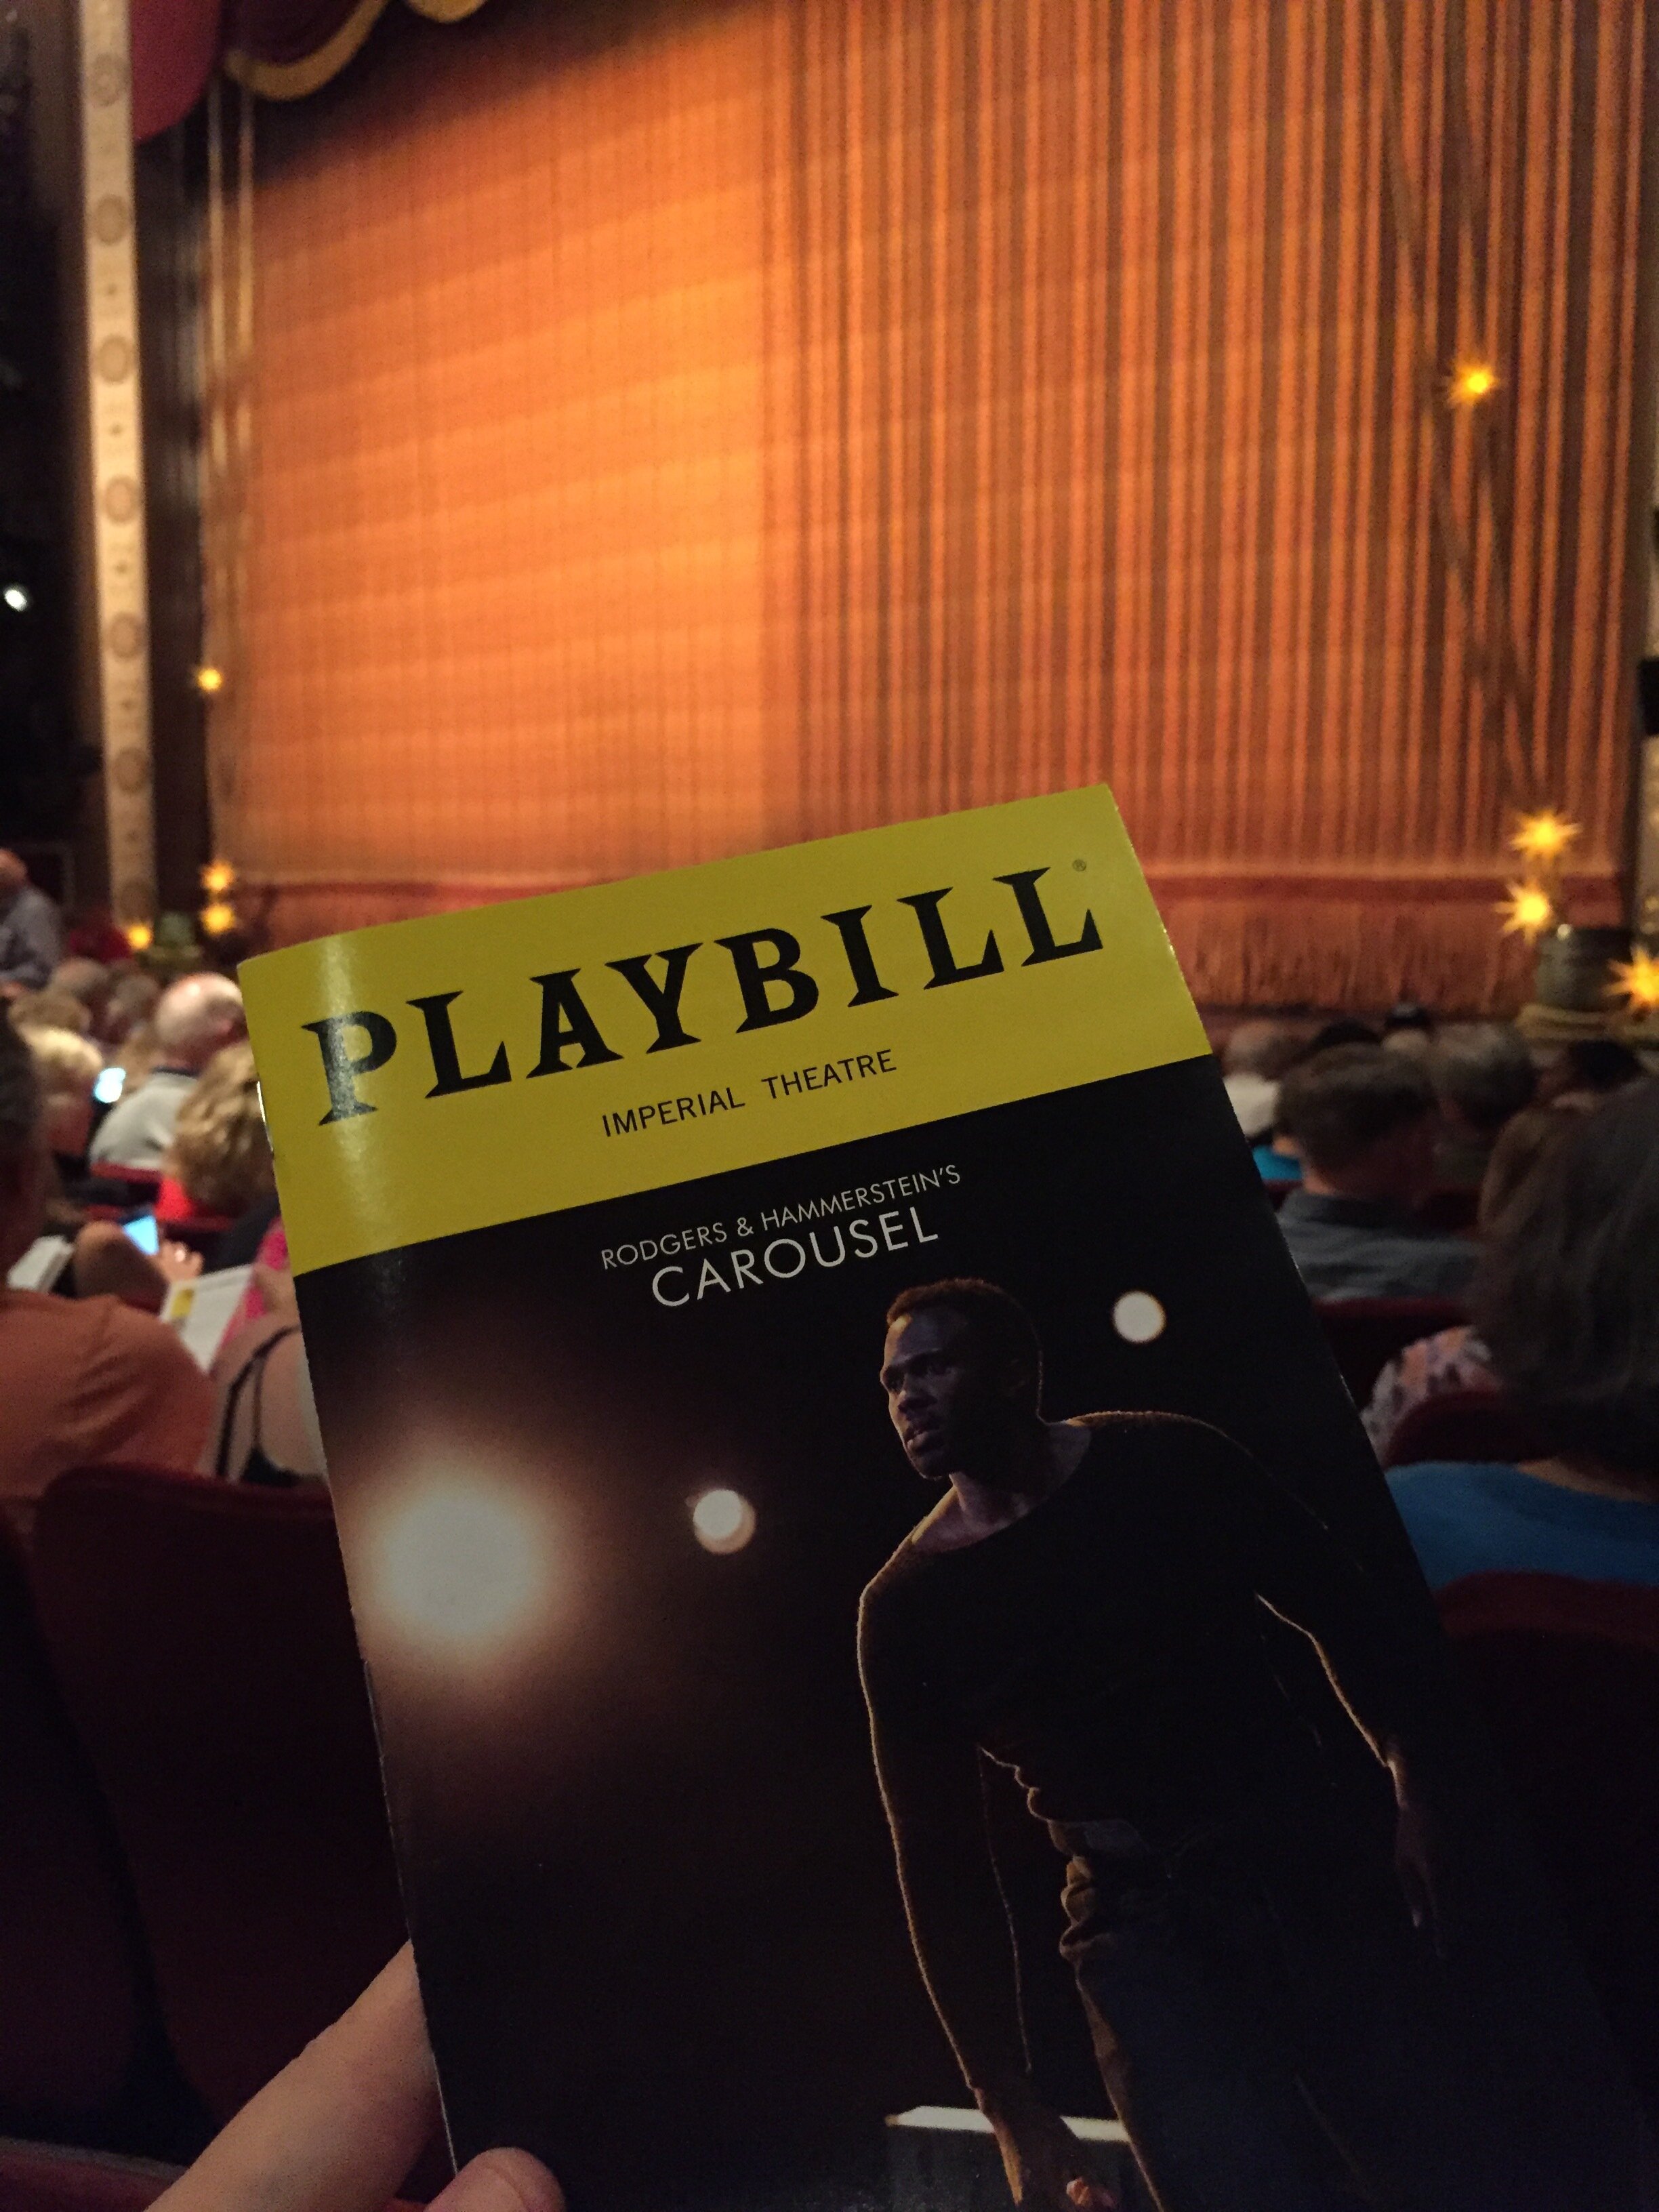 Carousel @ Imperial Theatre, NYC